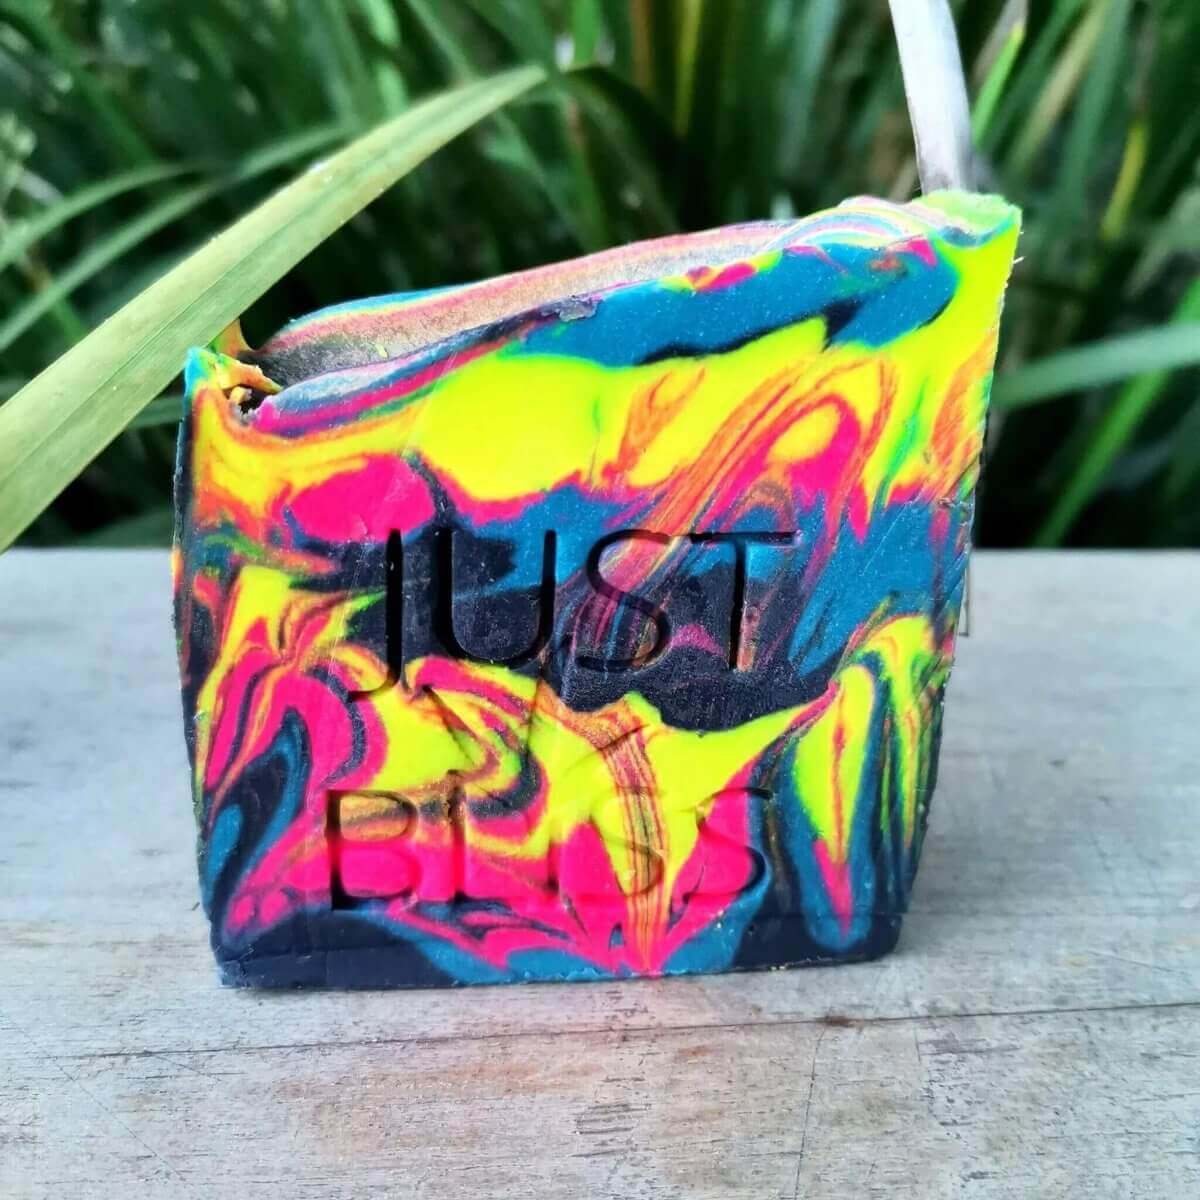 COMBO: Galaxy - JUSTBLiSS Soap